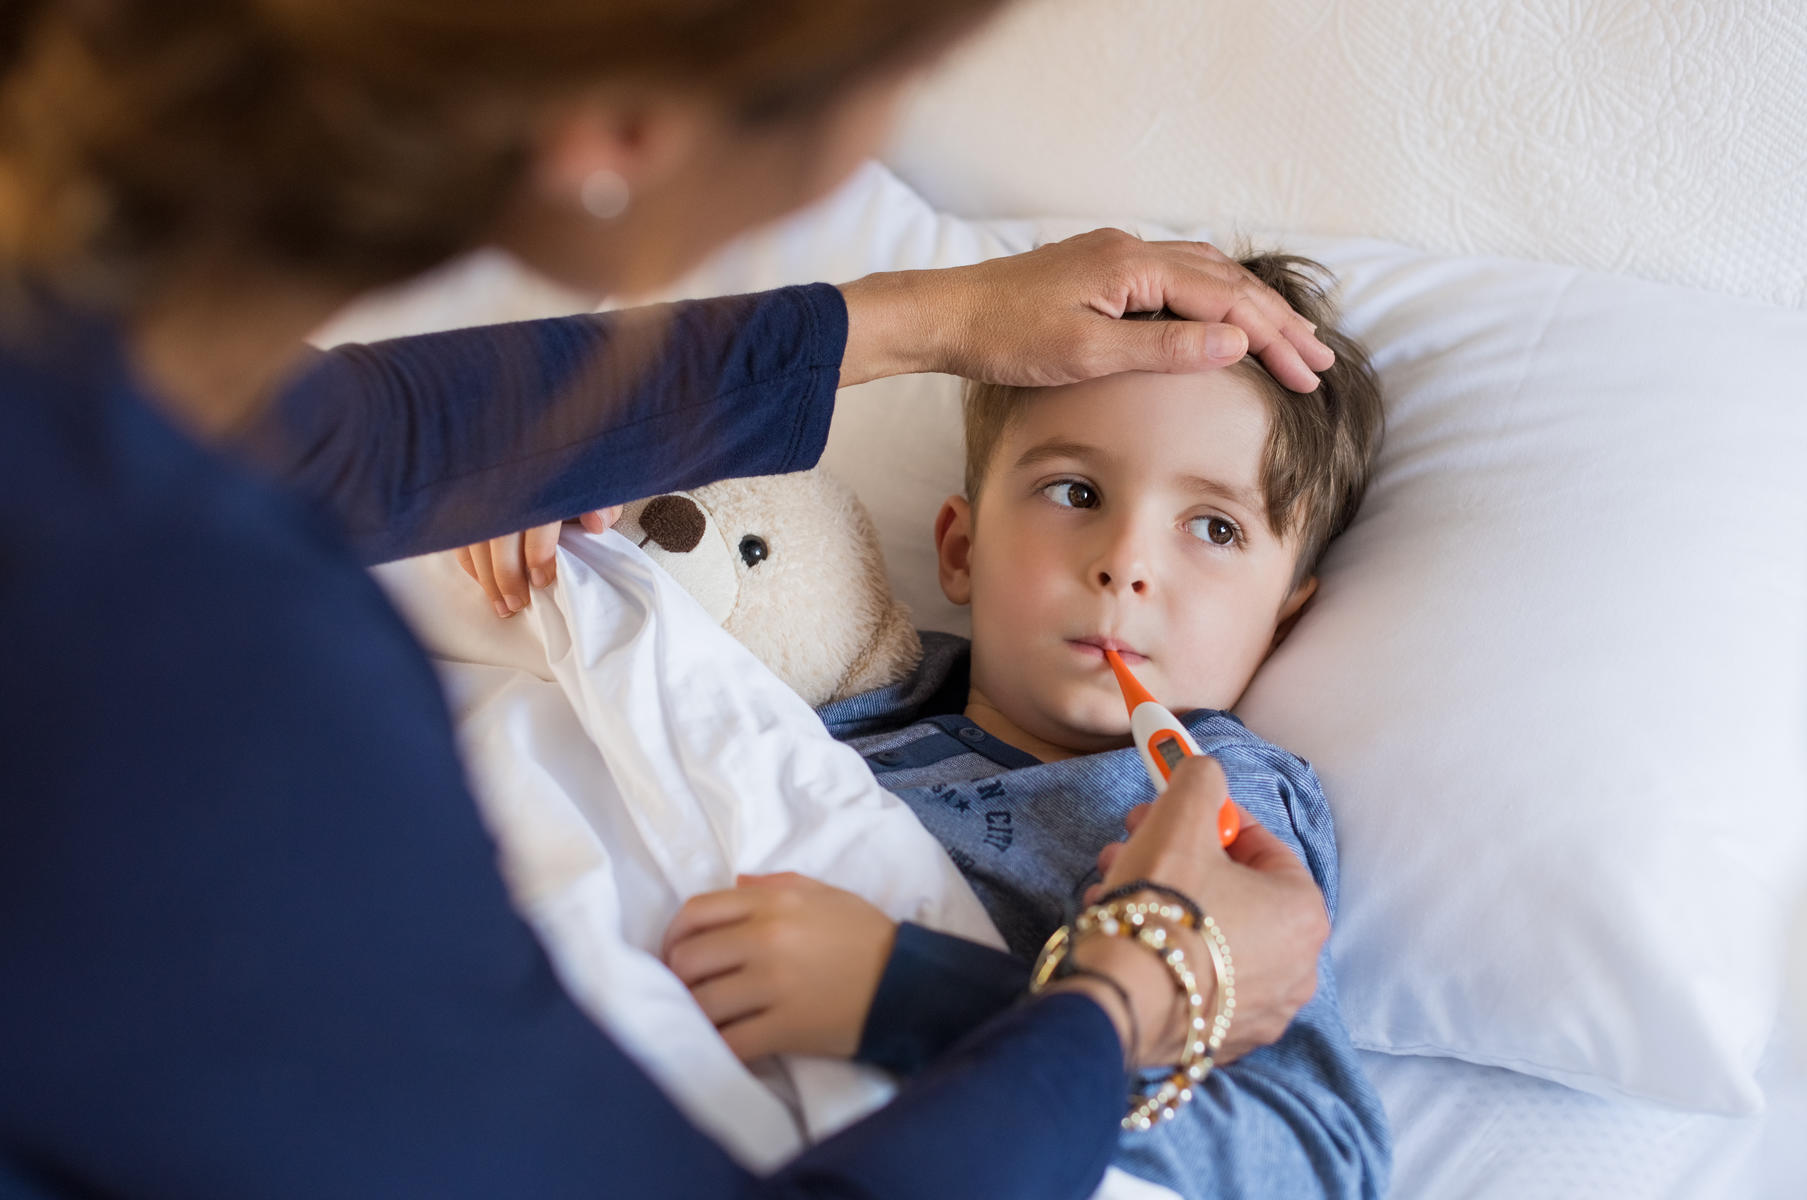 Children's Health: Why Your Child Keeps Getting Sick